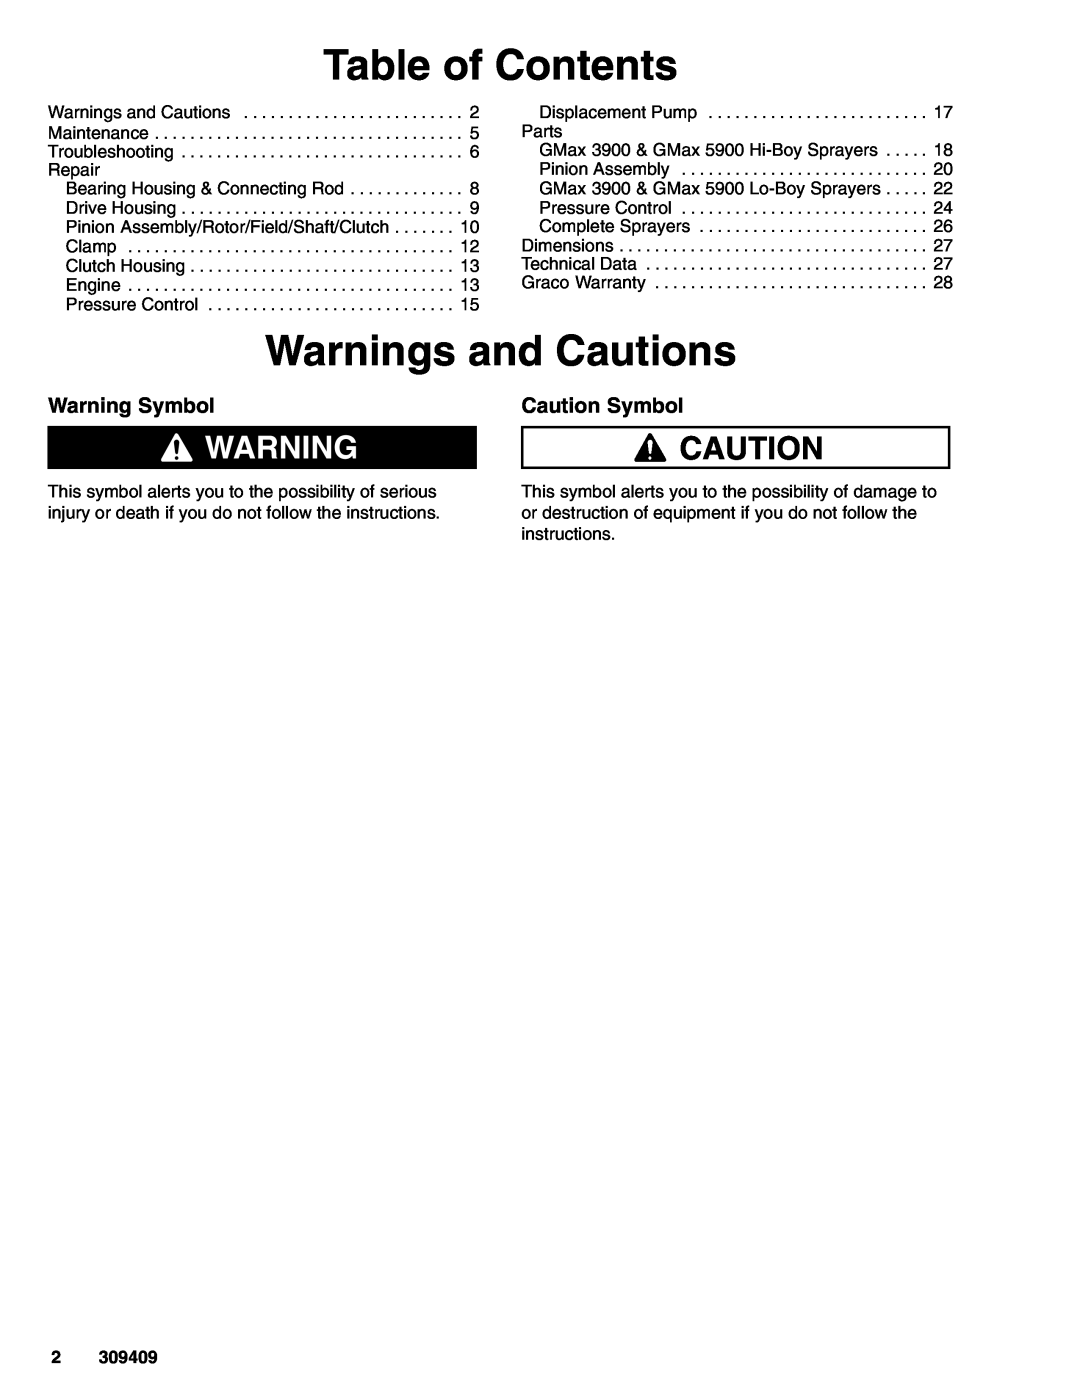 Graco Inc 233700, 233702, 233701, 309409E, 5900, 3900 Table of Contents, Warnings and Cautions, Warning Symbol, Caution Symbol 